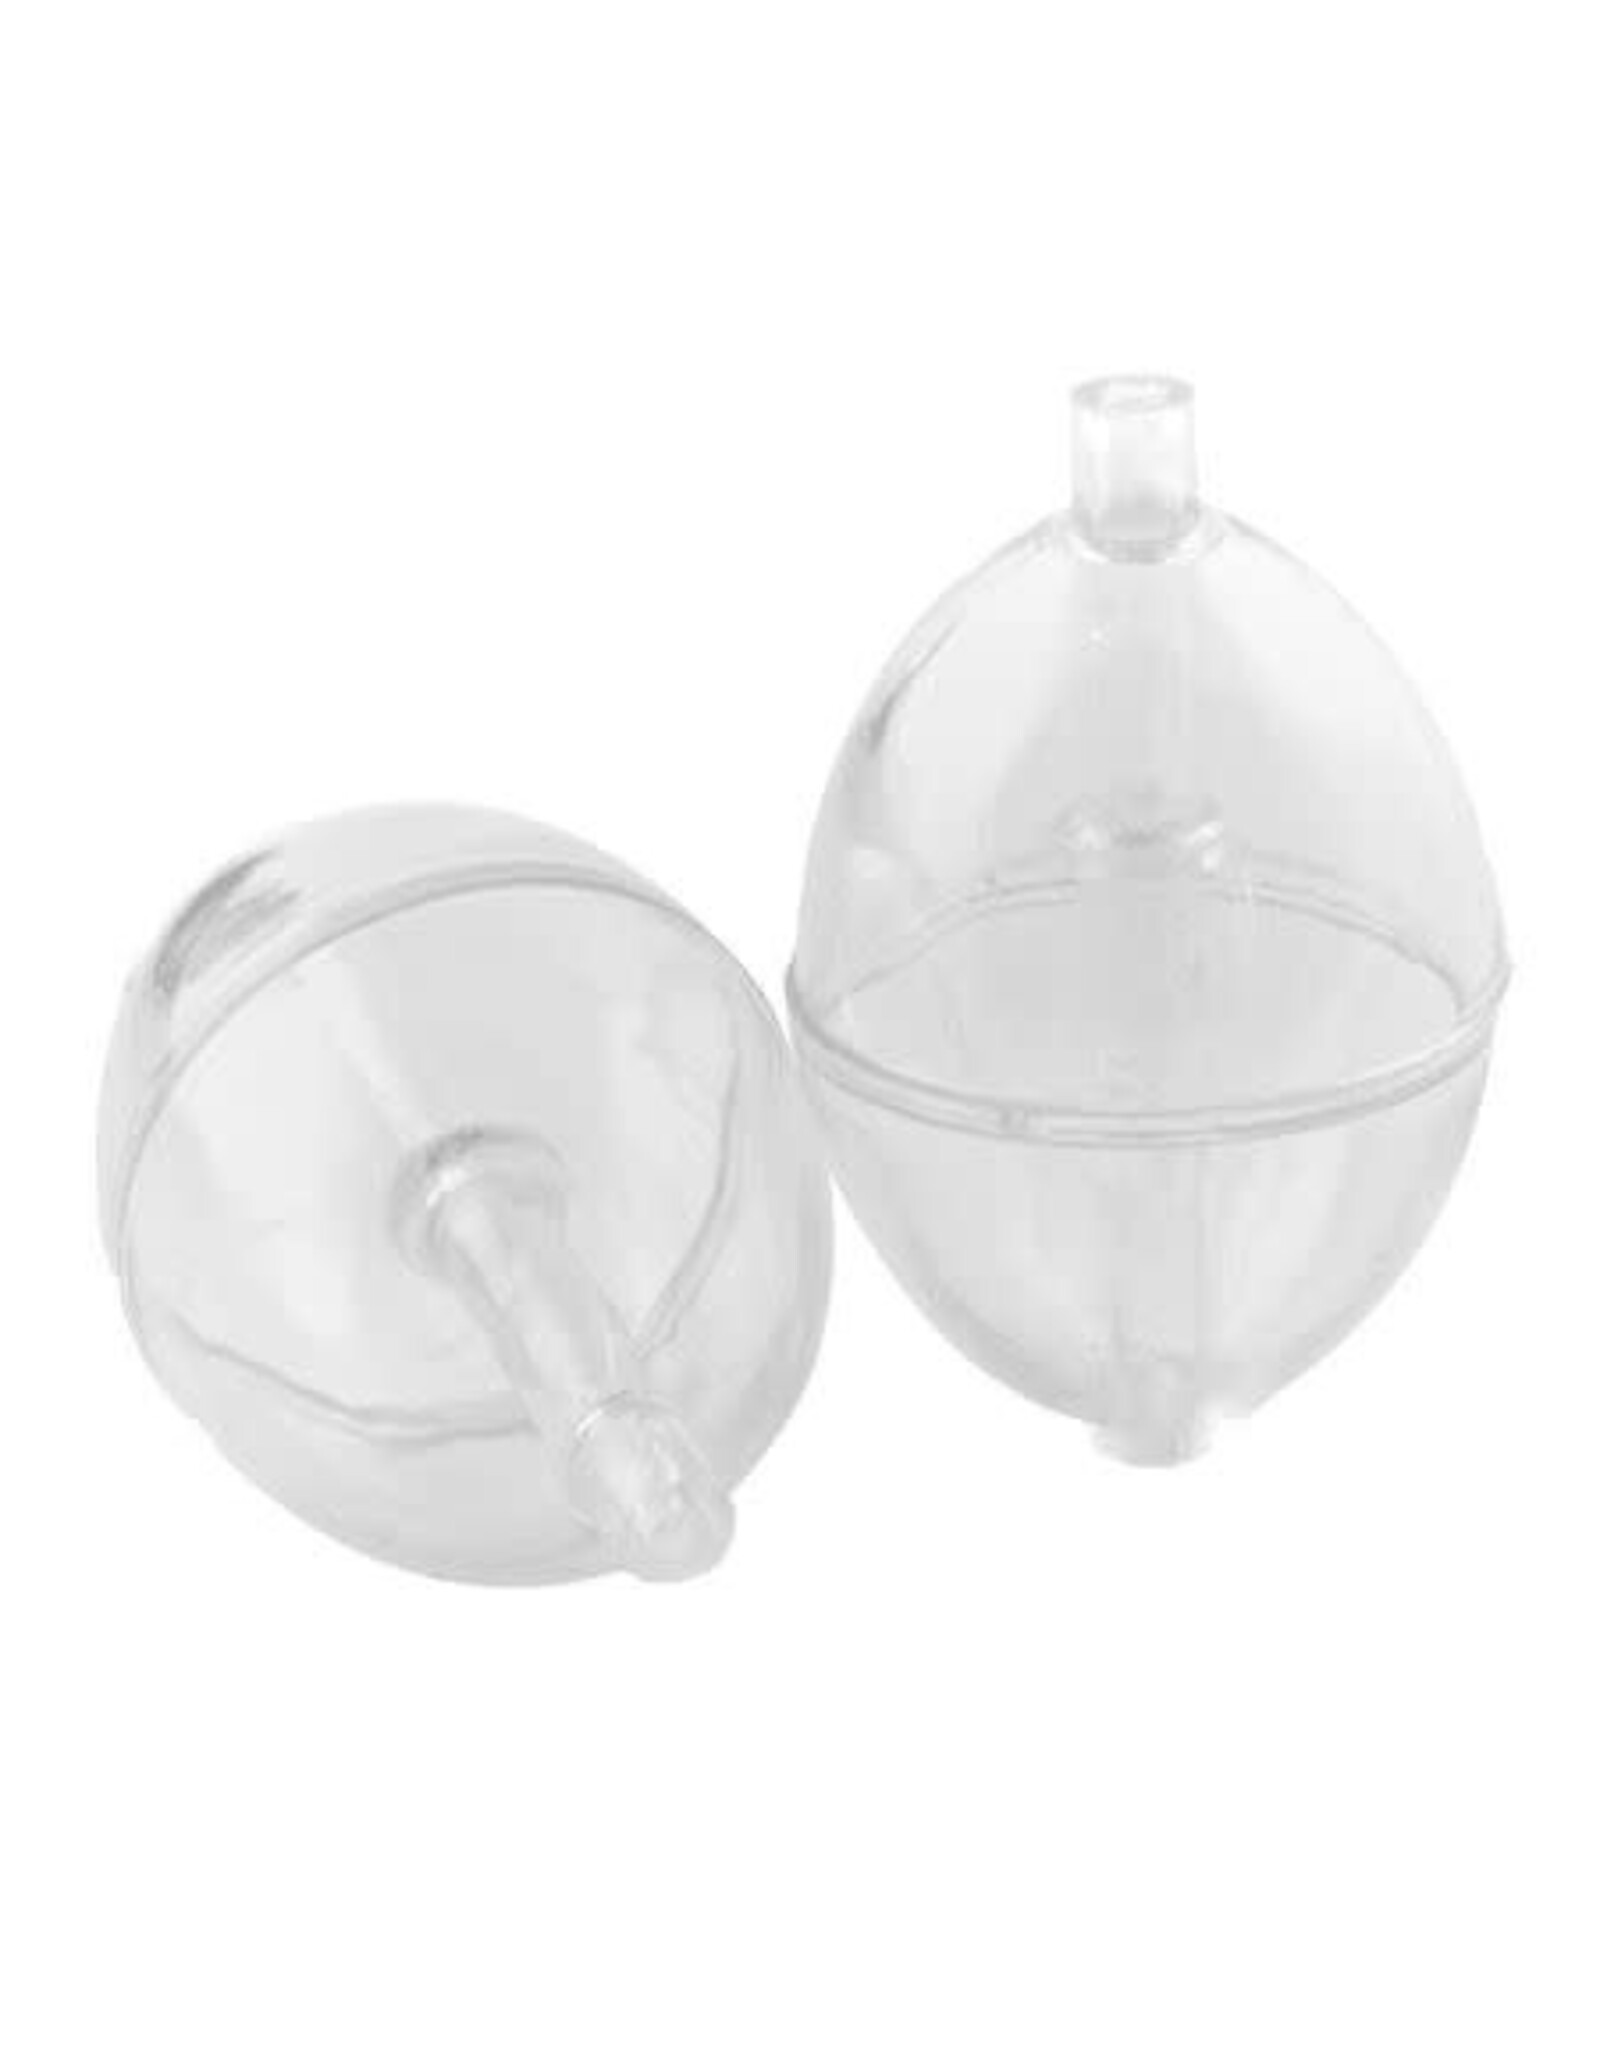 Danielson Spin Floats - 2" - 2 Count